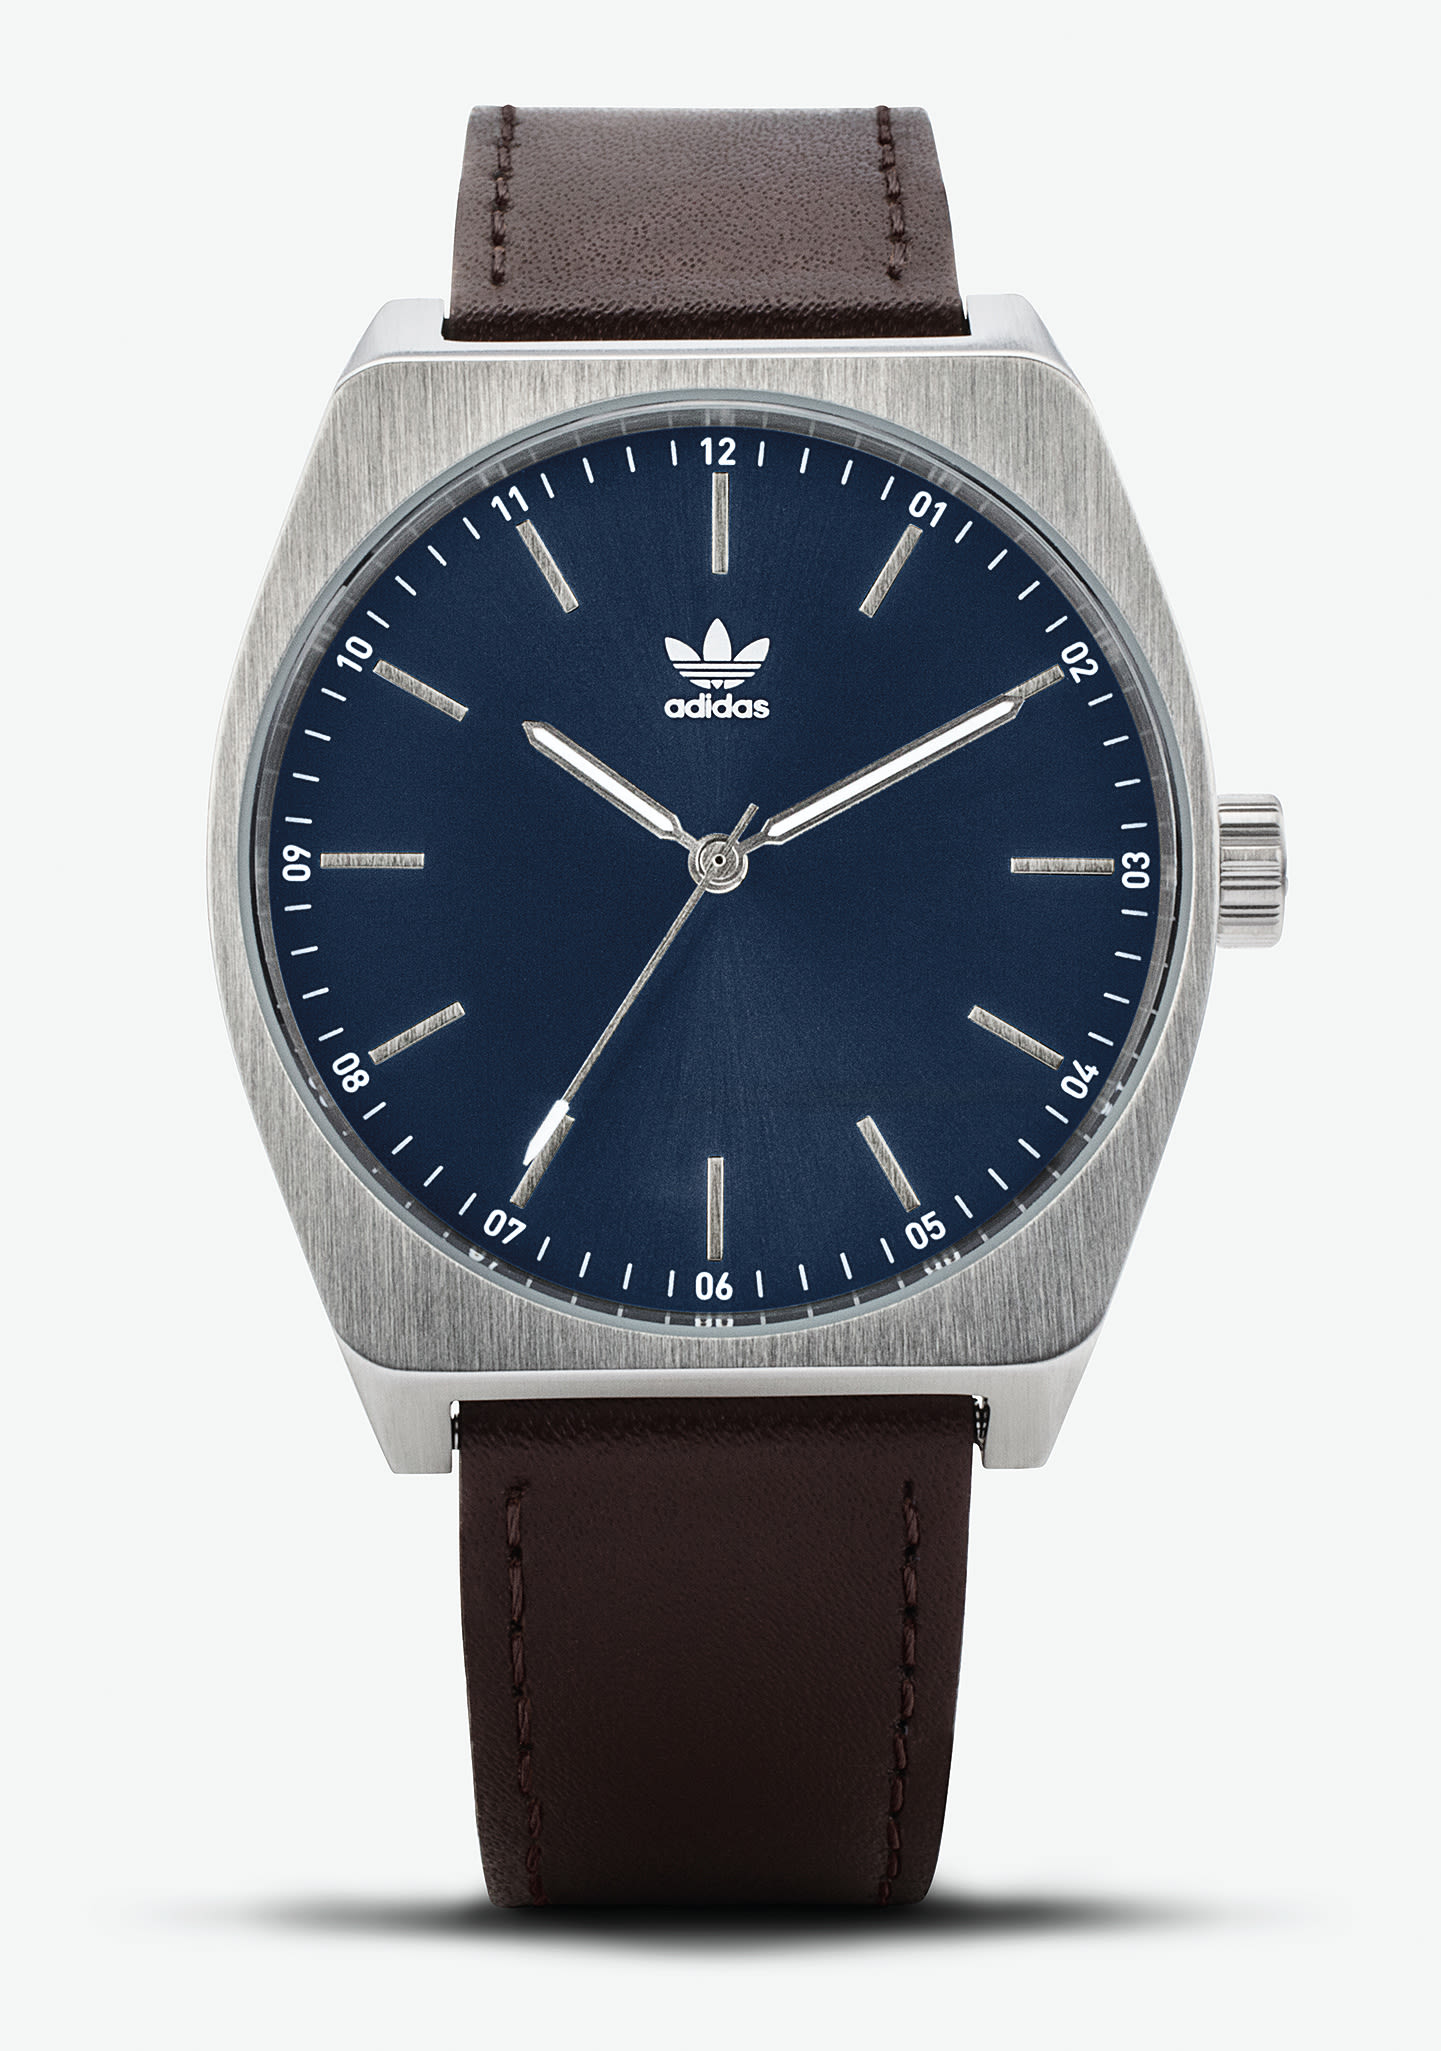 Adidas Originals Launches a Range of Heritage Inspired Timepieces | Complex